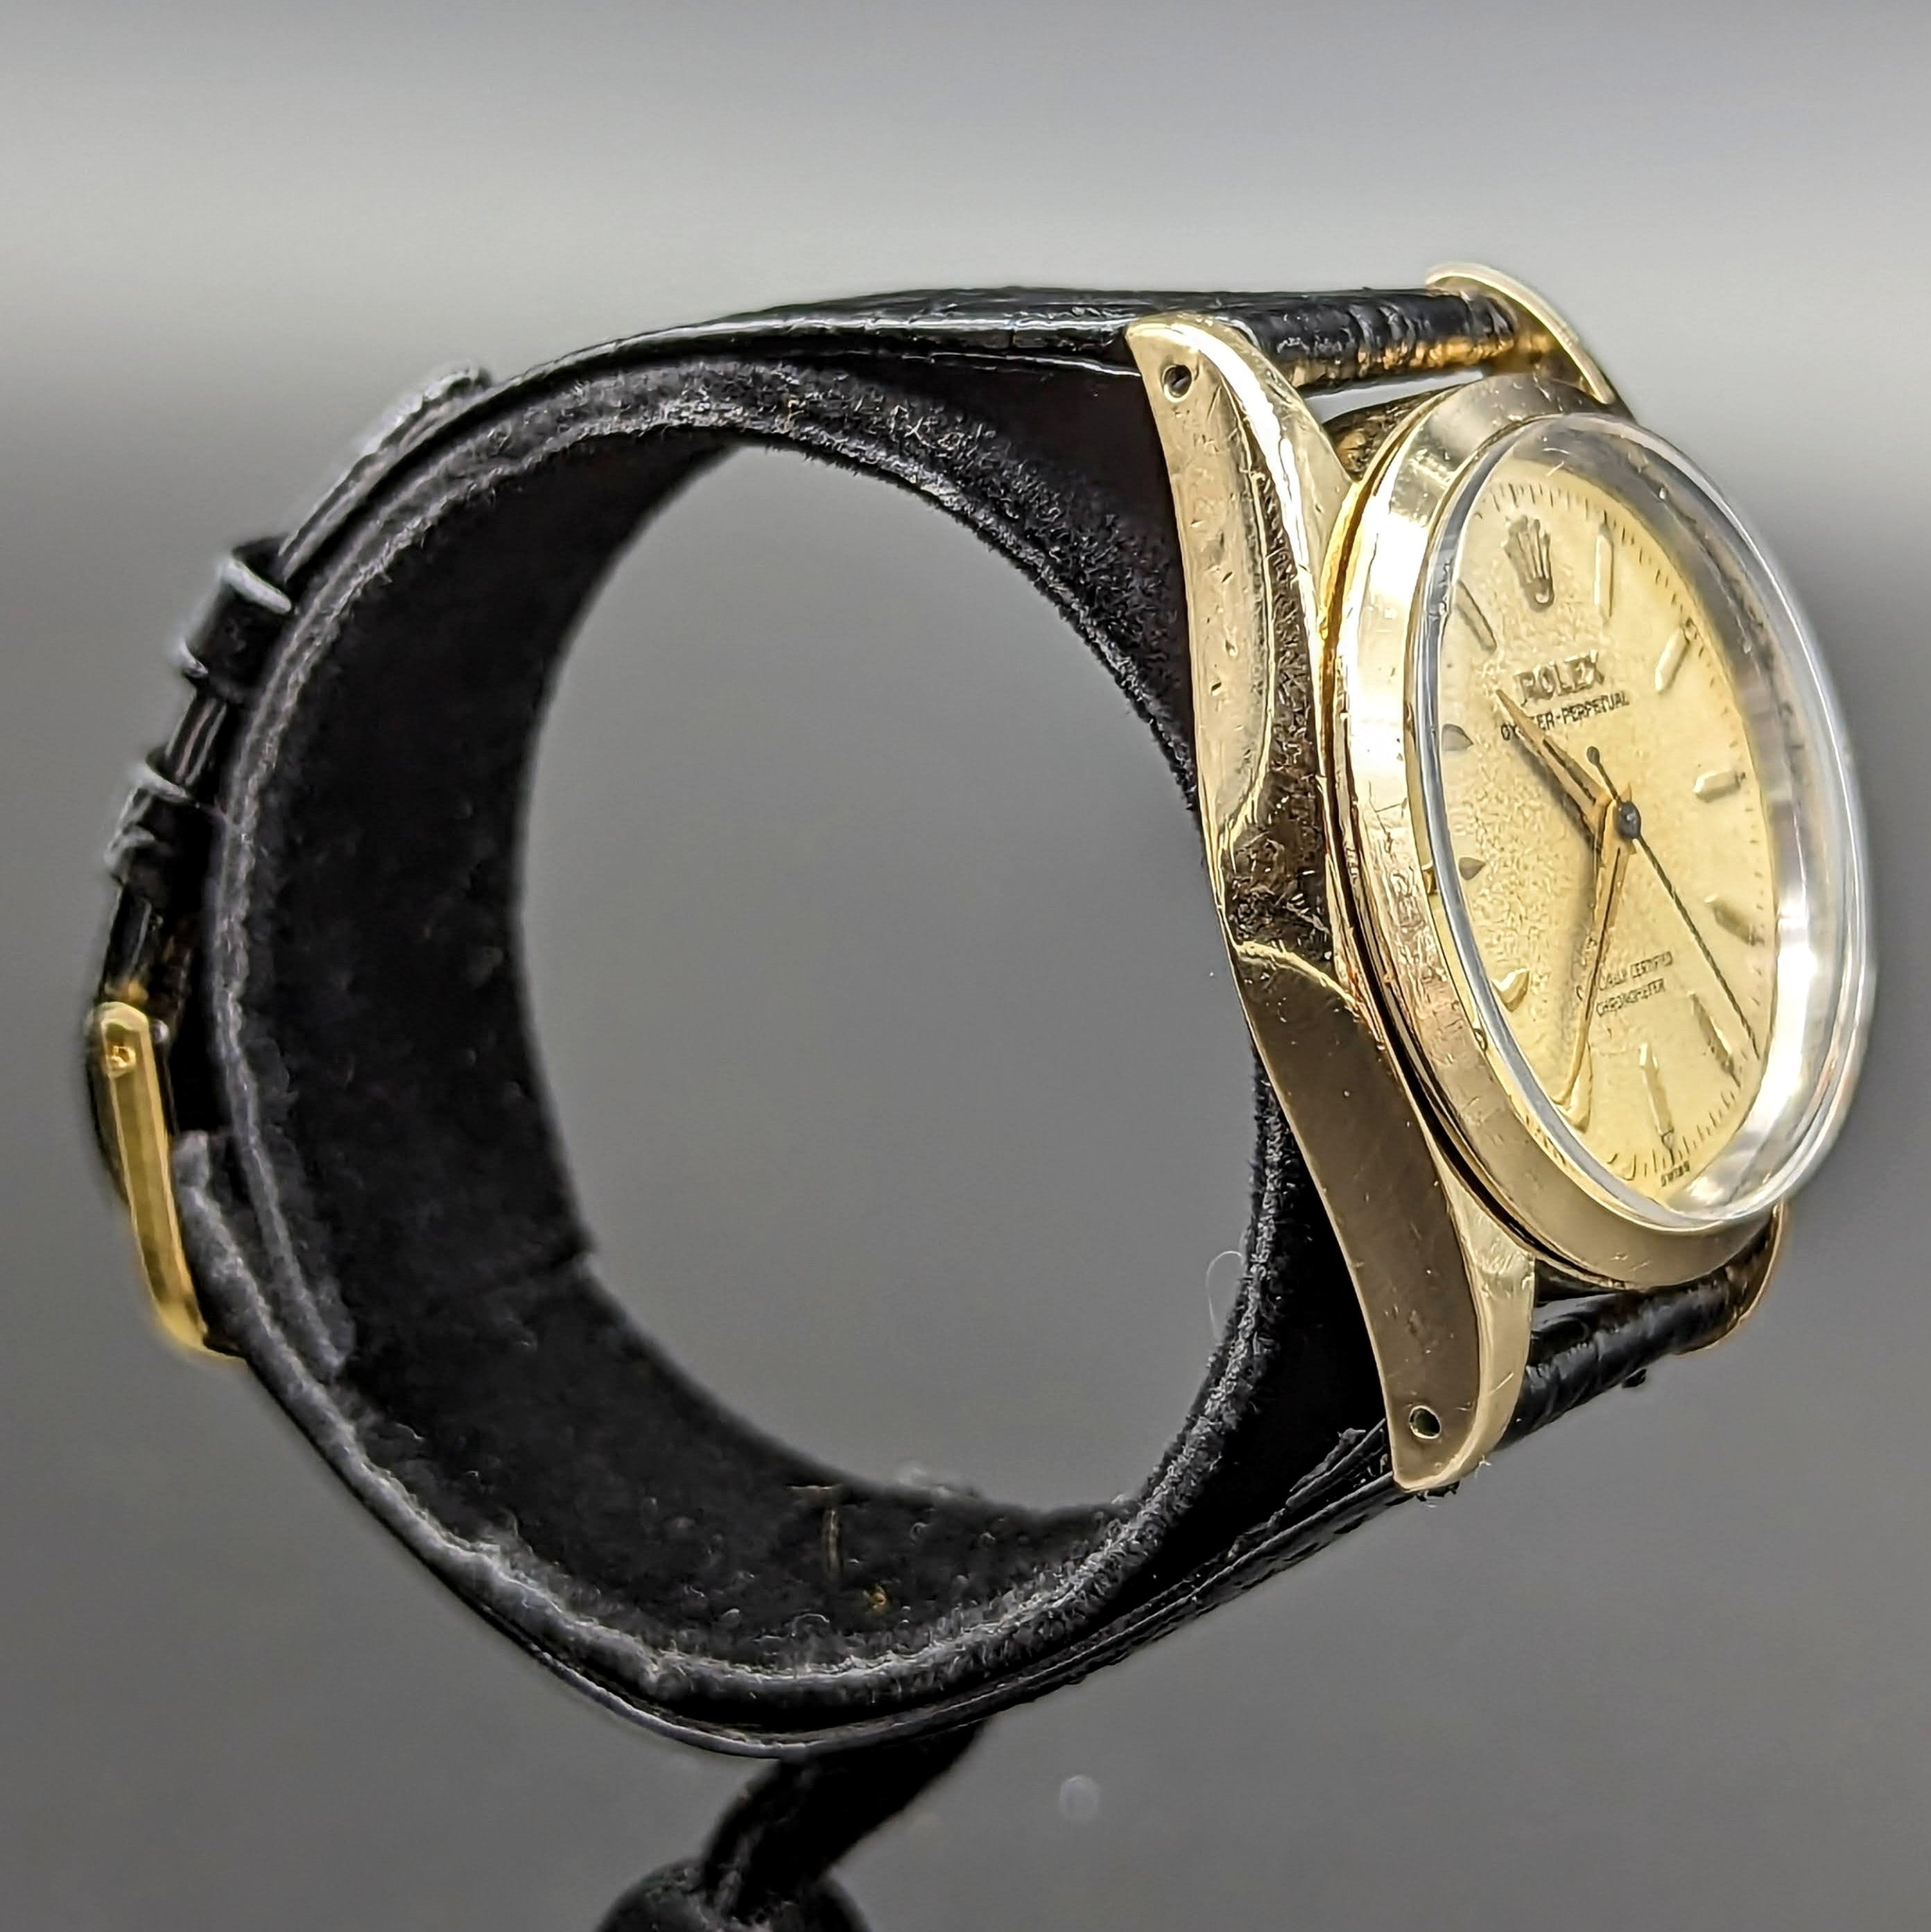 1957 ROLEX Oyster Perpetual Chronometer Automatic Wristwatch Ref. 6634 Vintage Watch